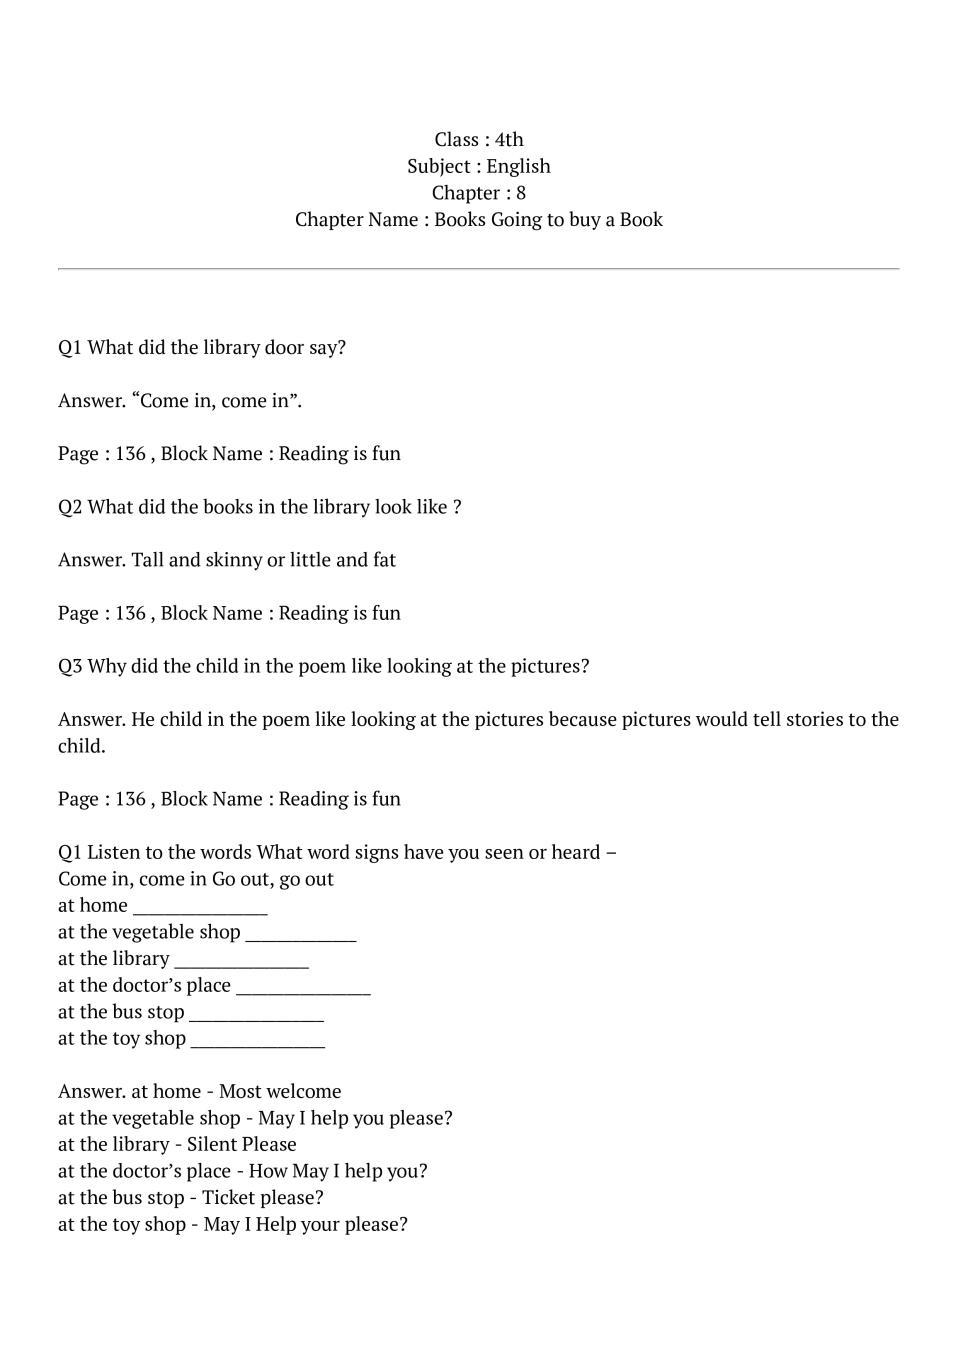 ncert-solutions-for-class-4-english-chapter-8-going-to-buy-a-book-pdf